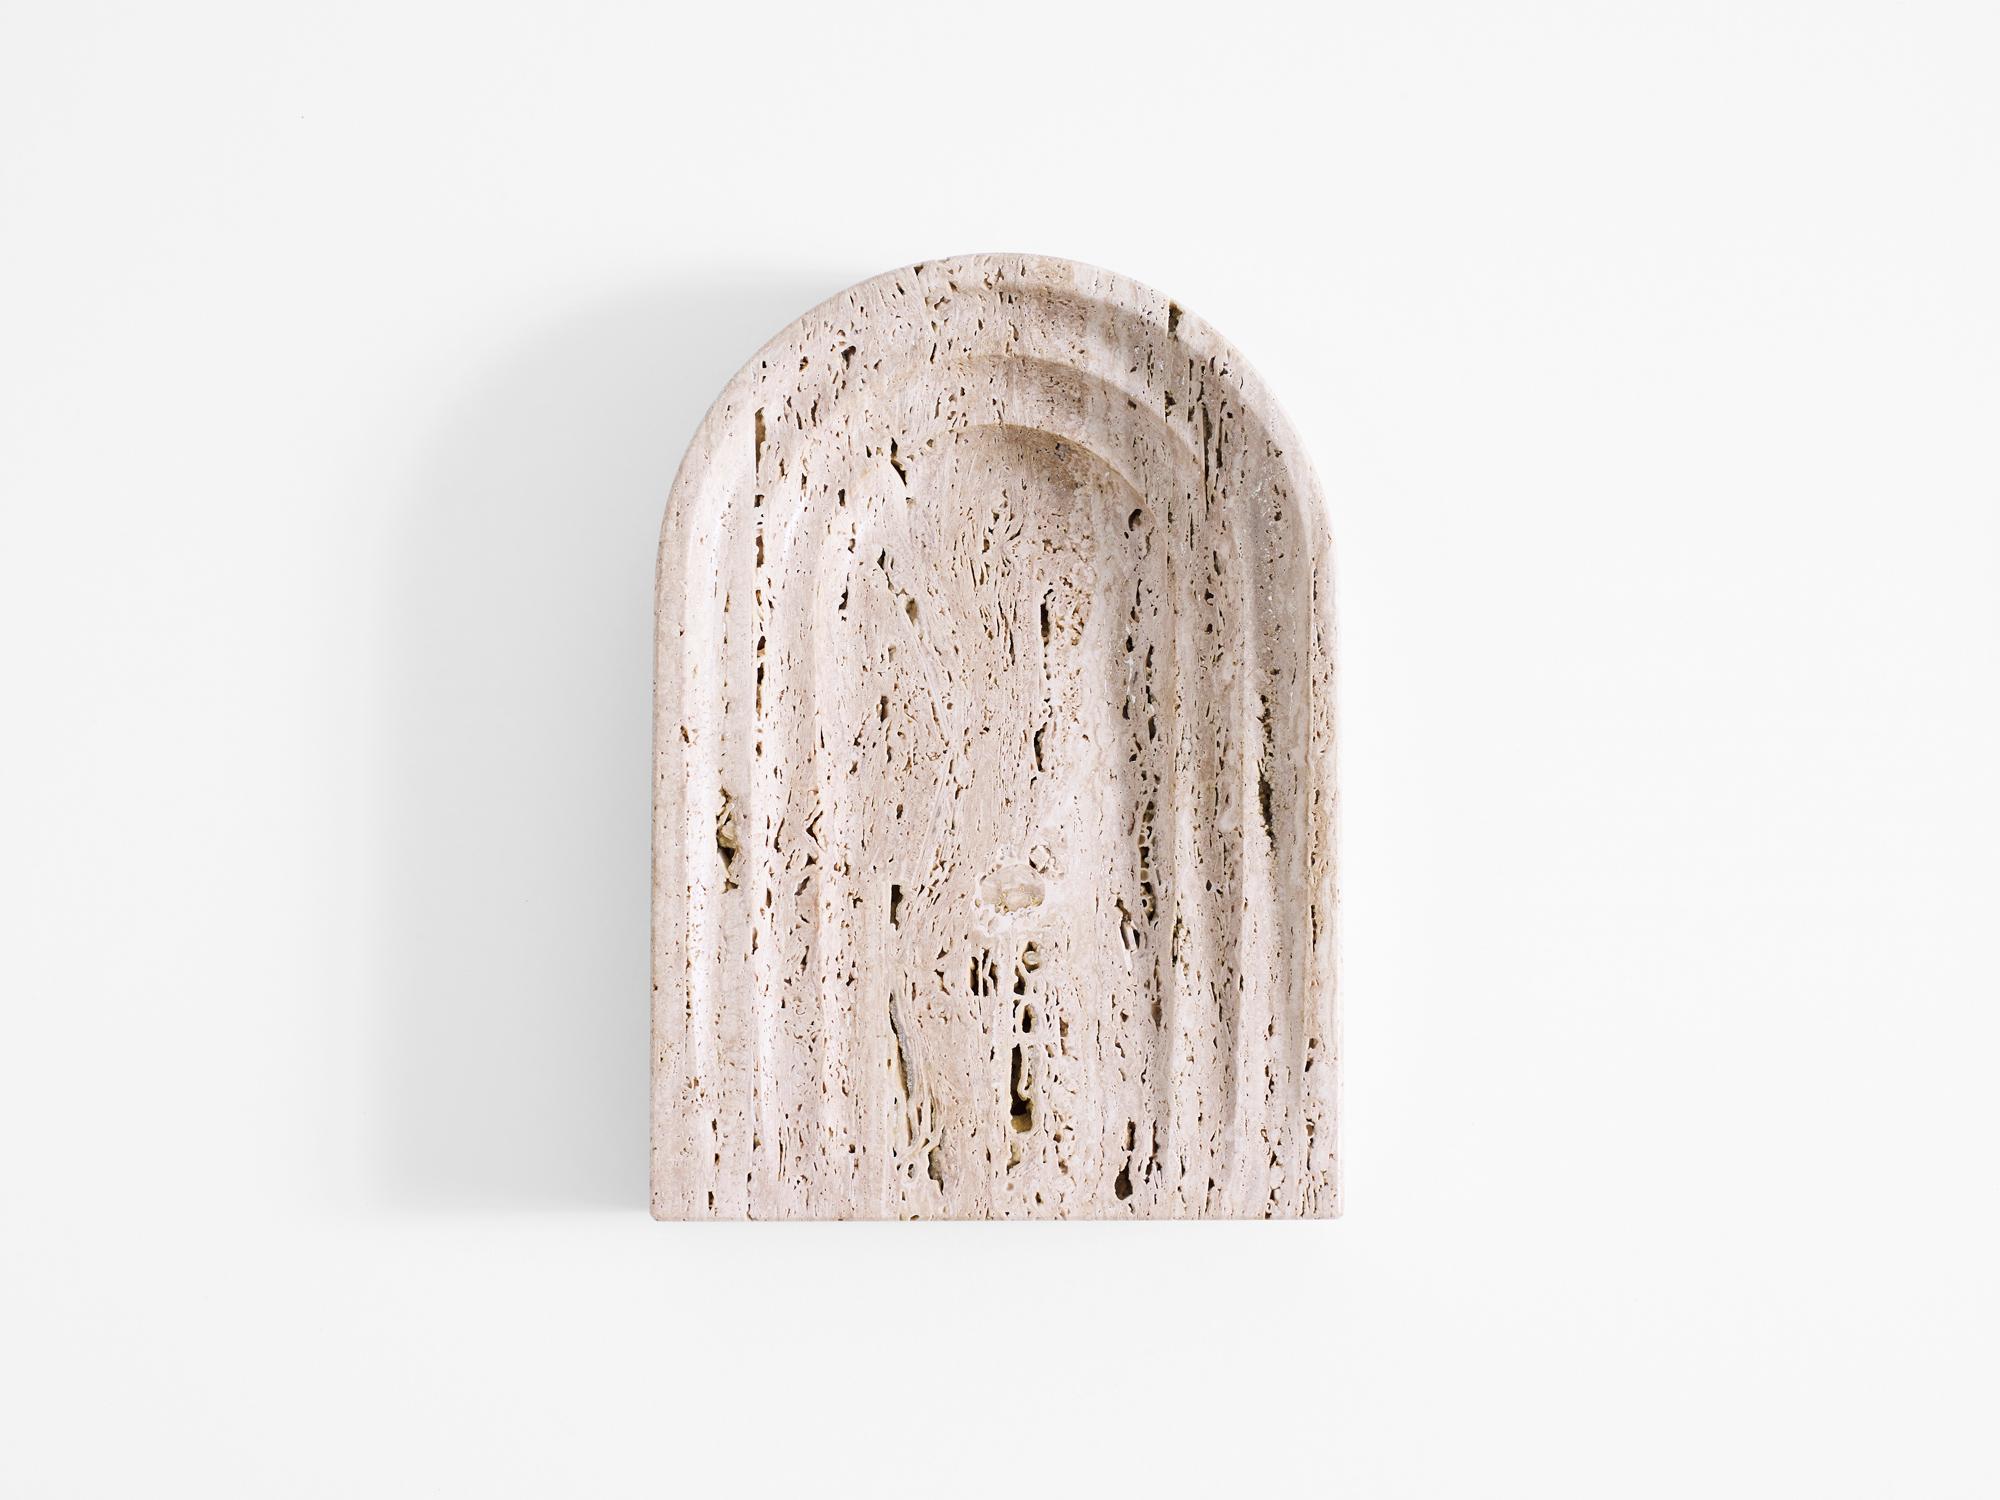 This Sculptural item is handmade in Sydney Australia.

Thoronet dish, shares its' name and arched lines with the Abby in the south of France. 

Each piece is manufactured in natural stone, meaning variations of the pattern in the stone will